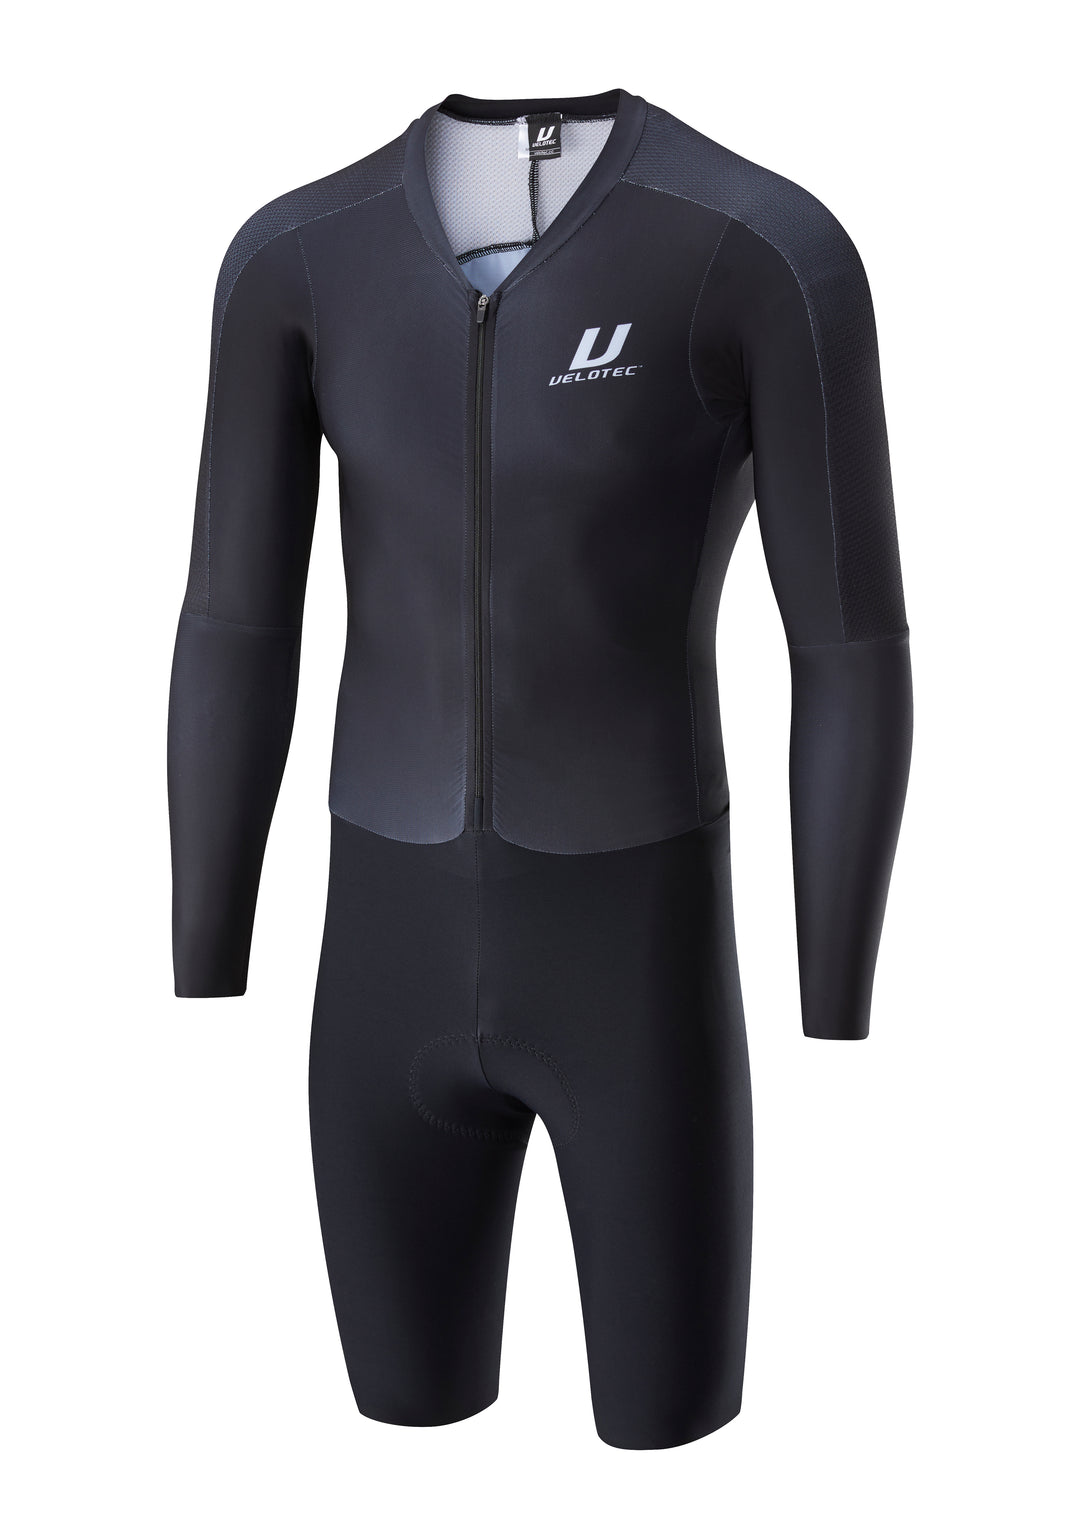 Made to Measure - PRO8 Speedsuit (UCI Legal)